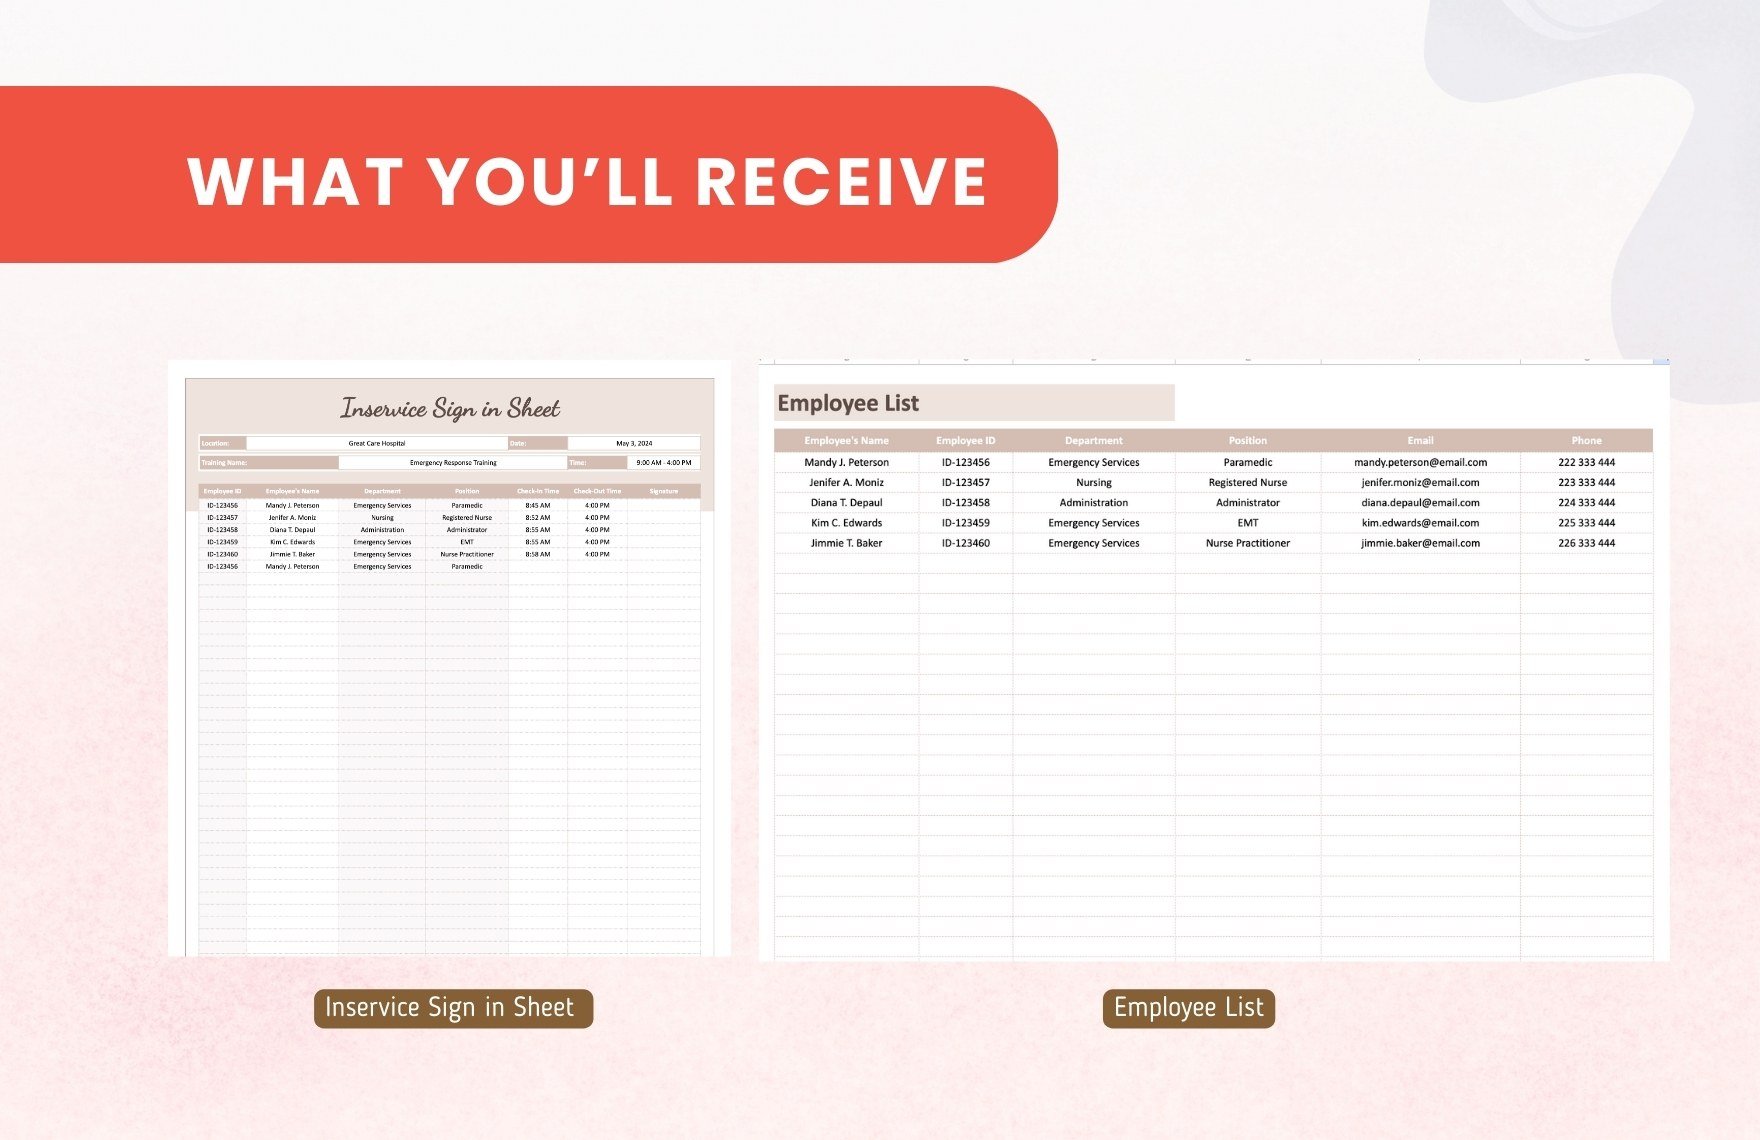 Inservice Sign in Sheet Template